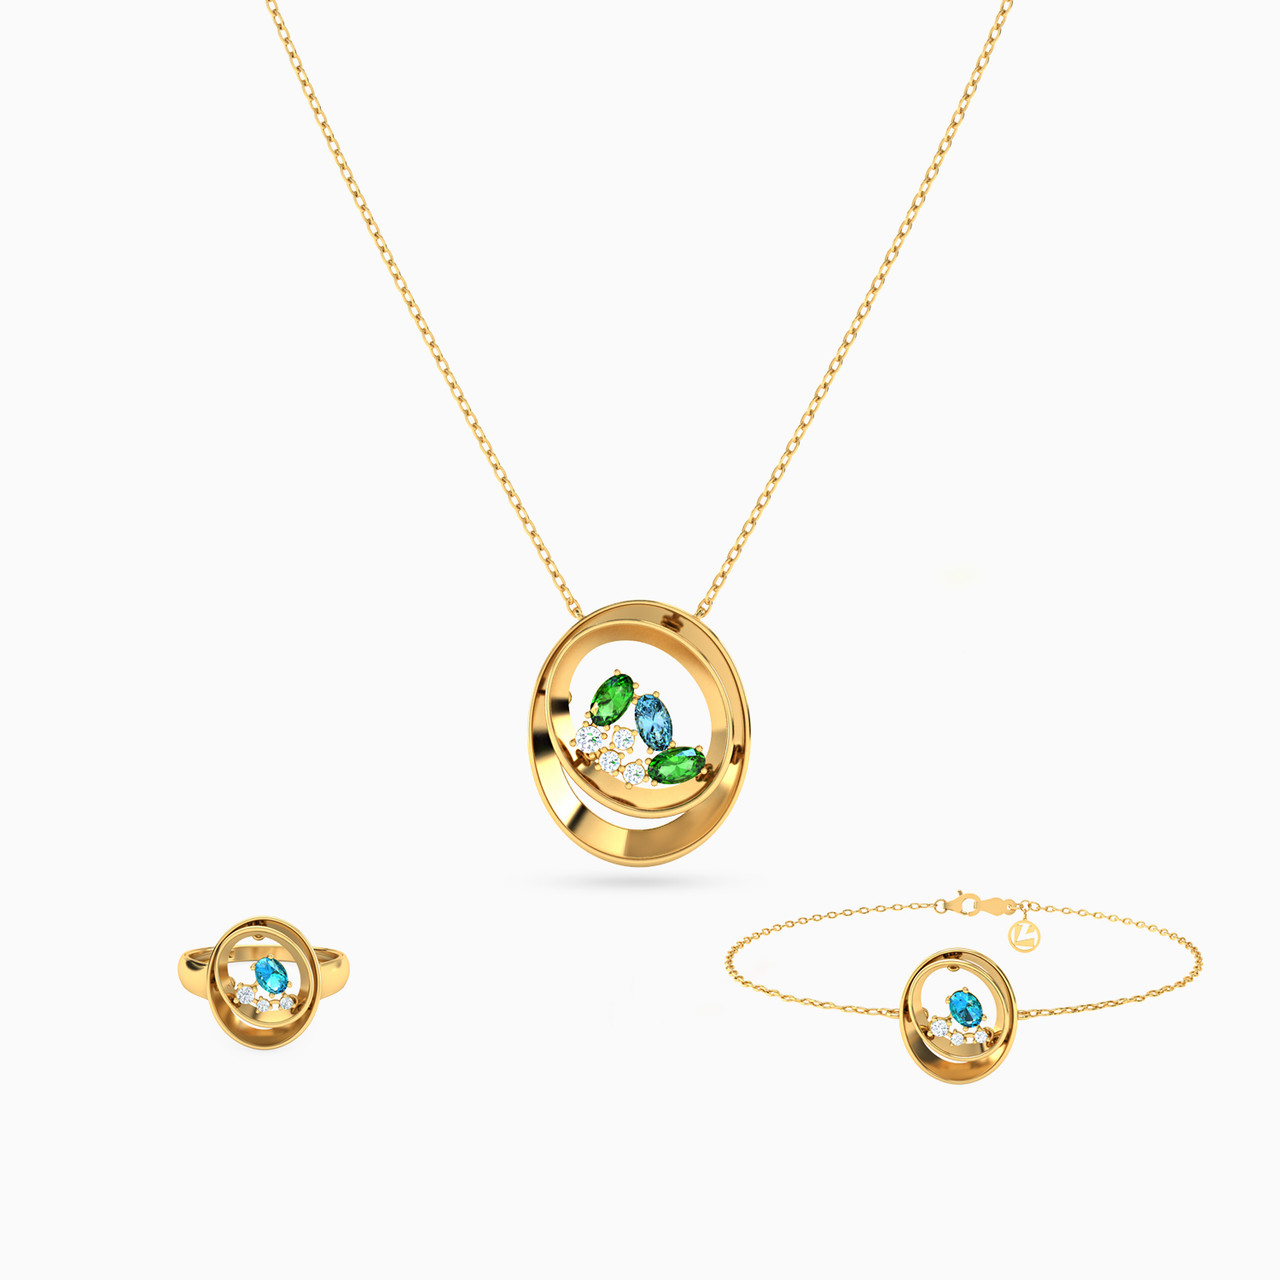 18K Gold Colored Stones Jewelry Set -3 Pieces